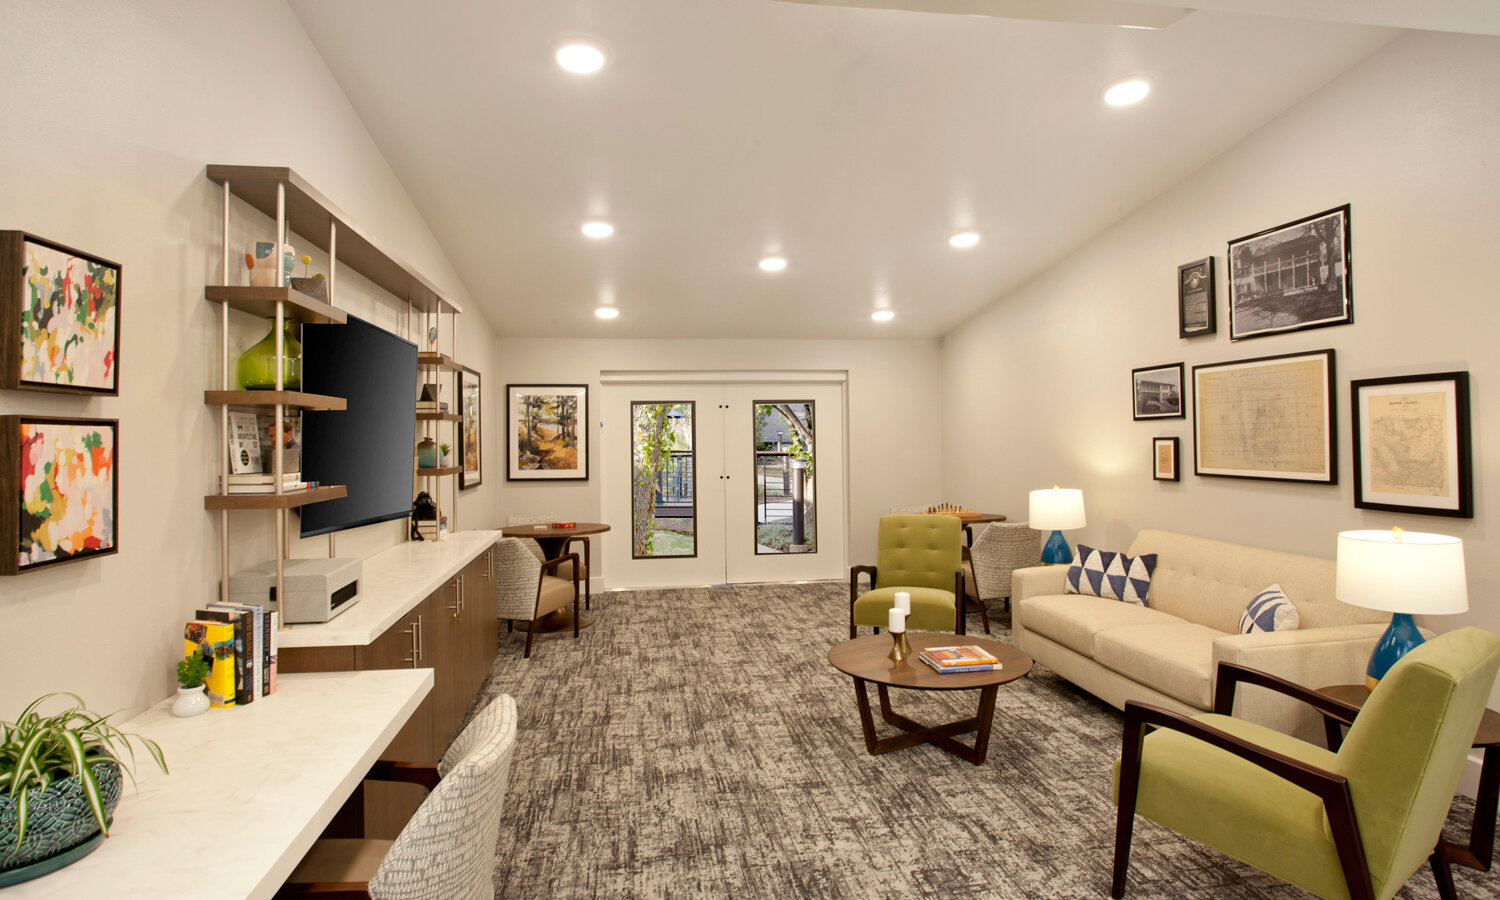 pi-architects-fairhaven-assisted-living-living-room.jpg